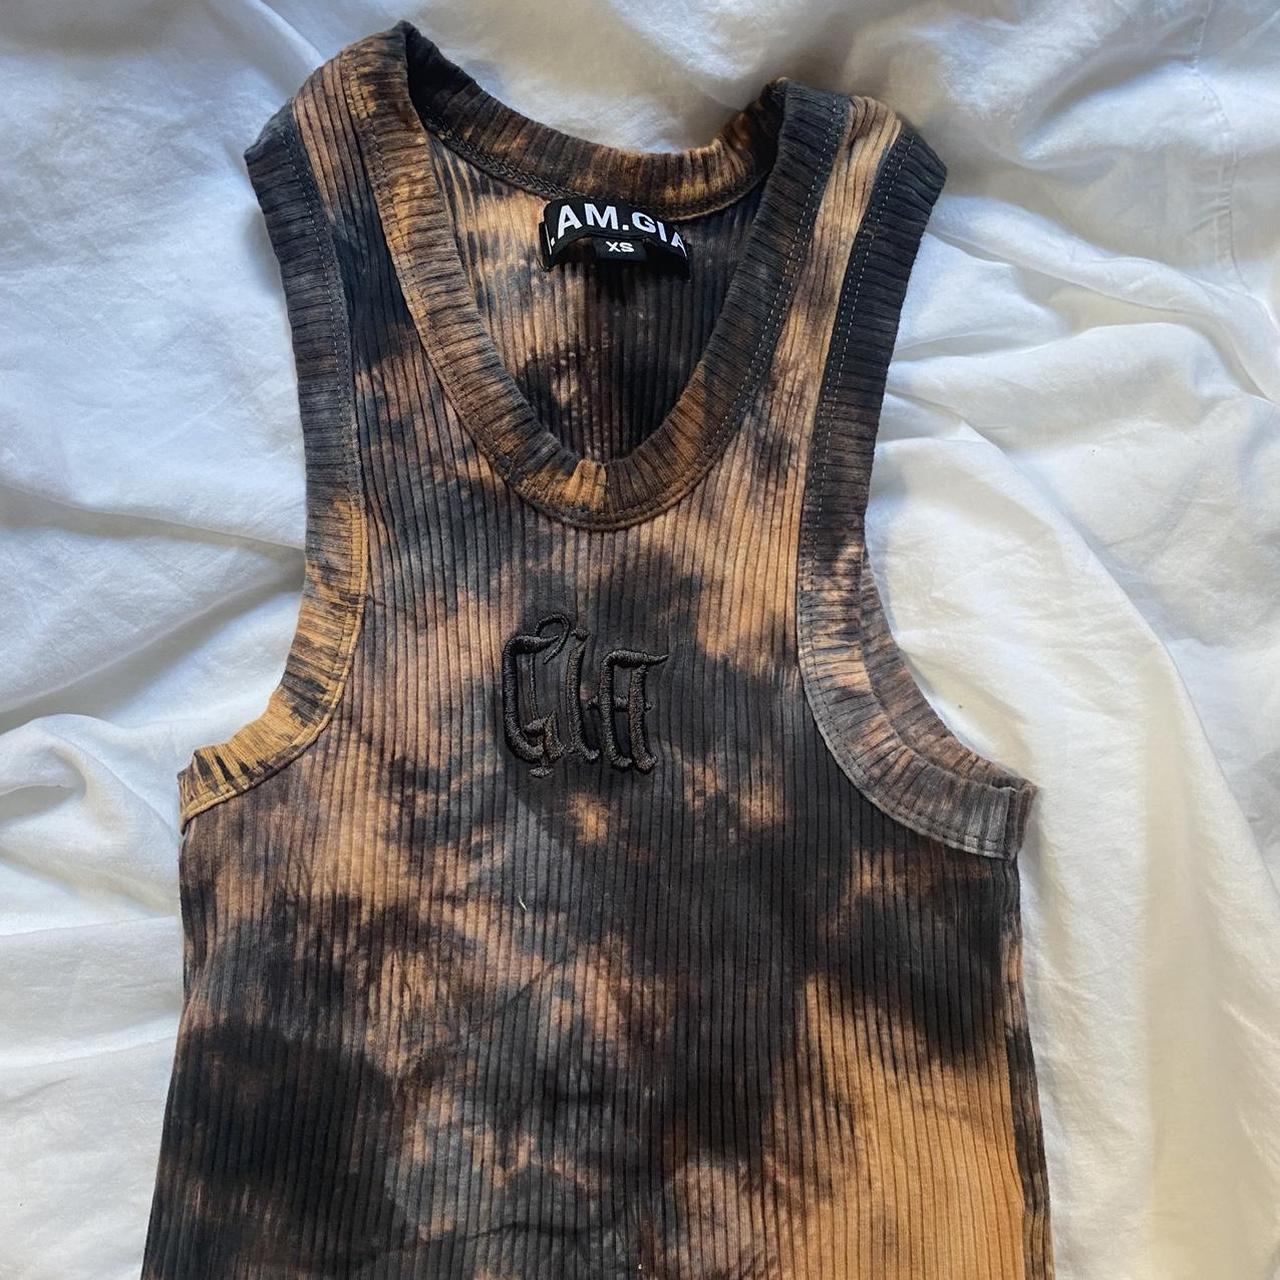 Product Image 1 - I.AM.GIA tank top 
Tie dye